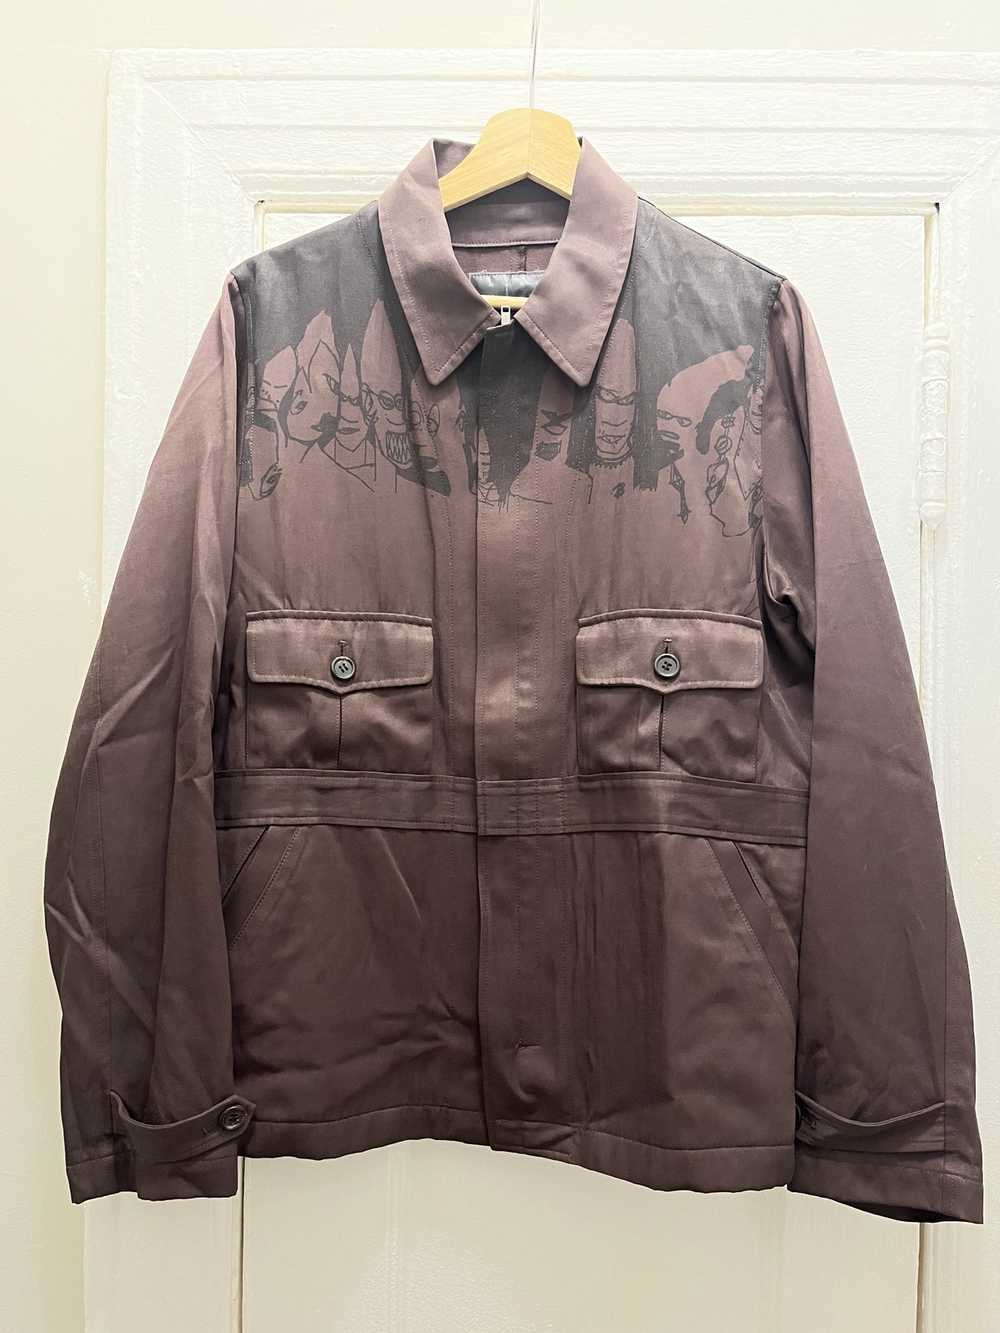 Undercover Undercover AW01 Futura Jacket - image 1